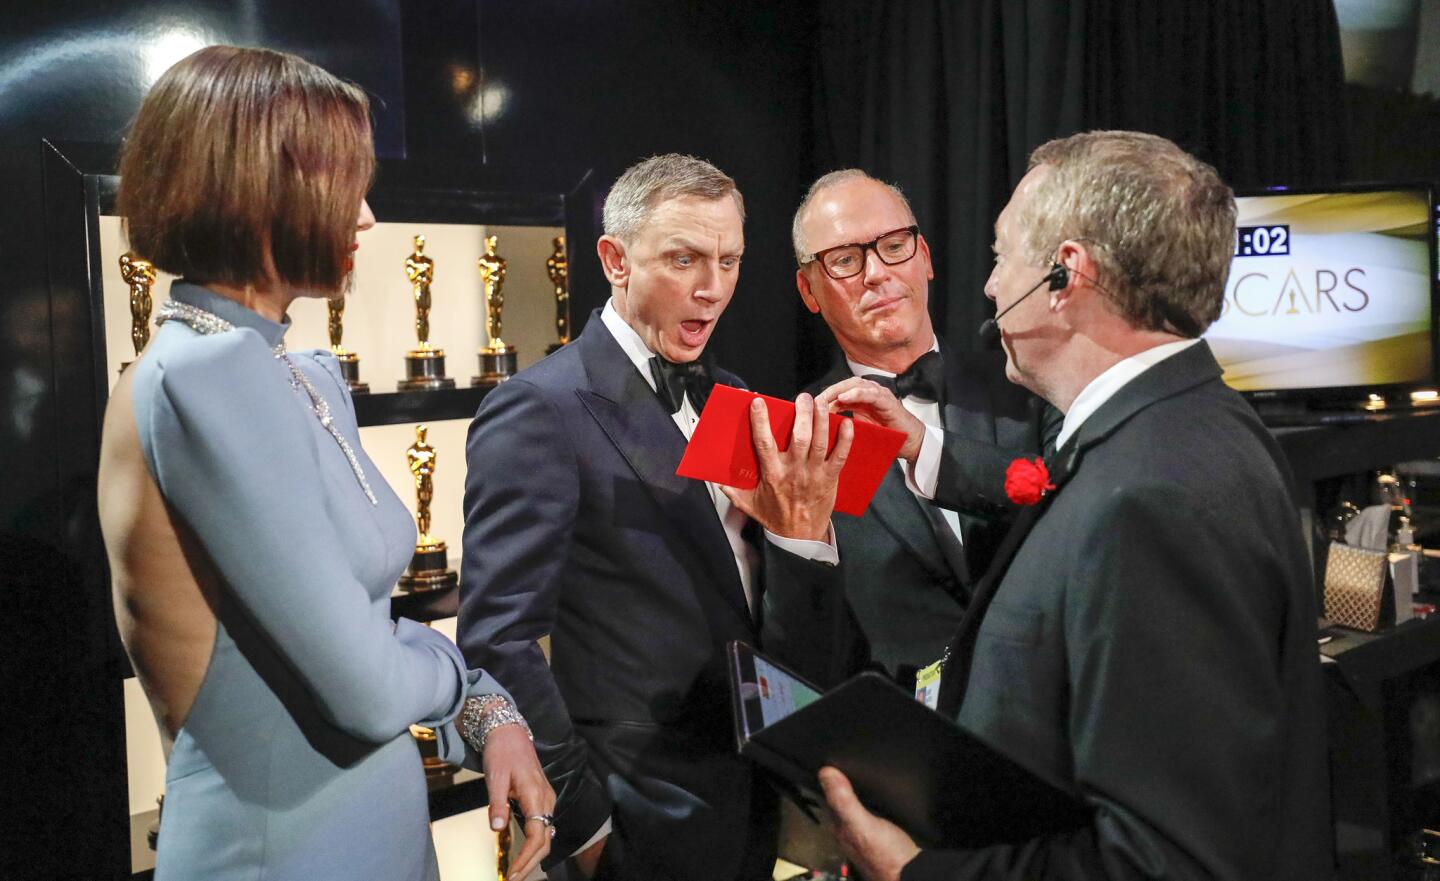 Presenters Charlize Theron, Daniel Craig and Michael Keaton backstage at the Dolby Theatre.